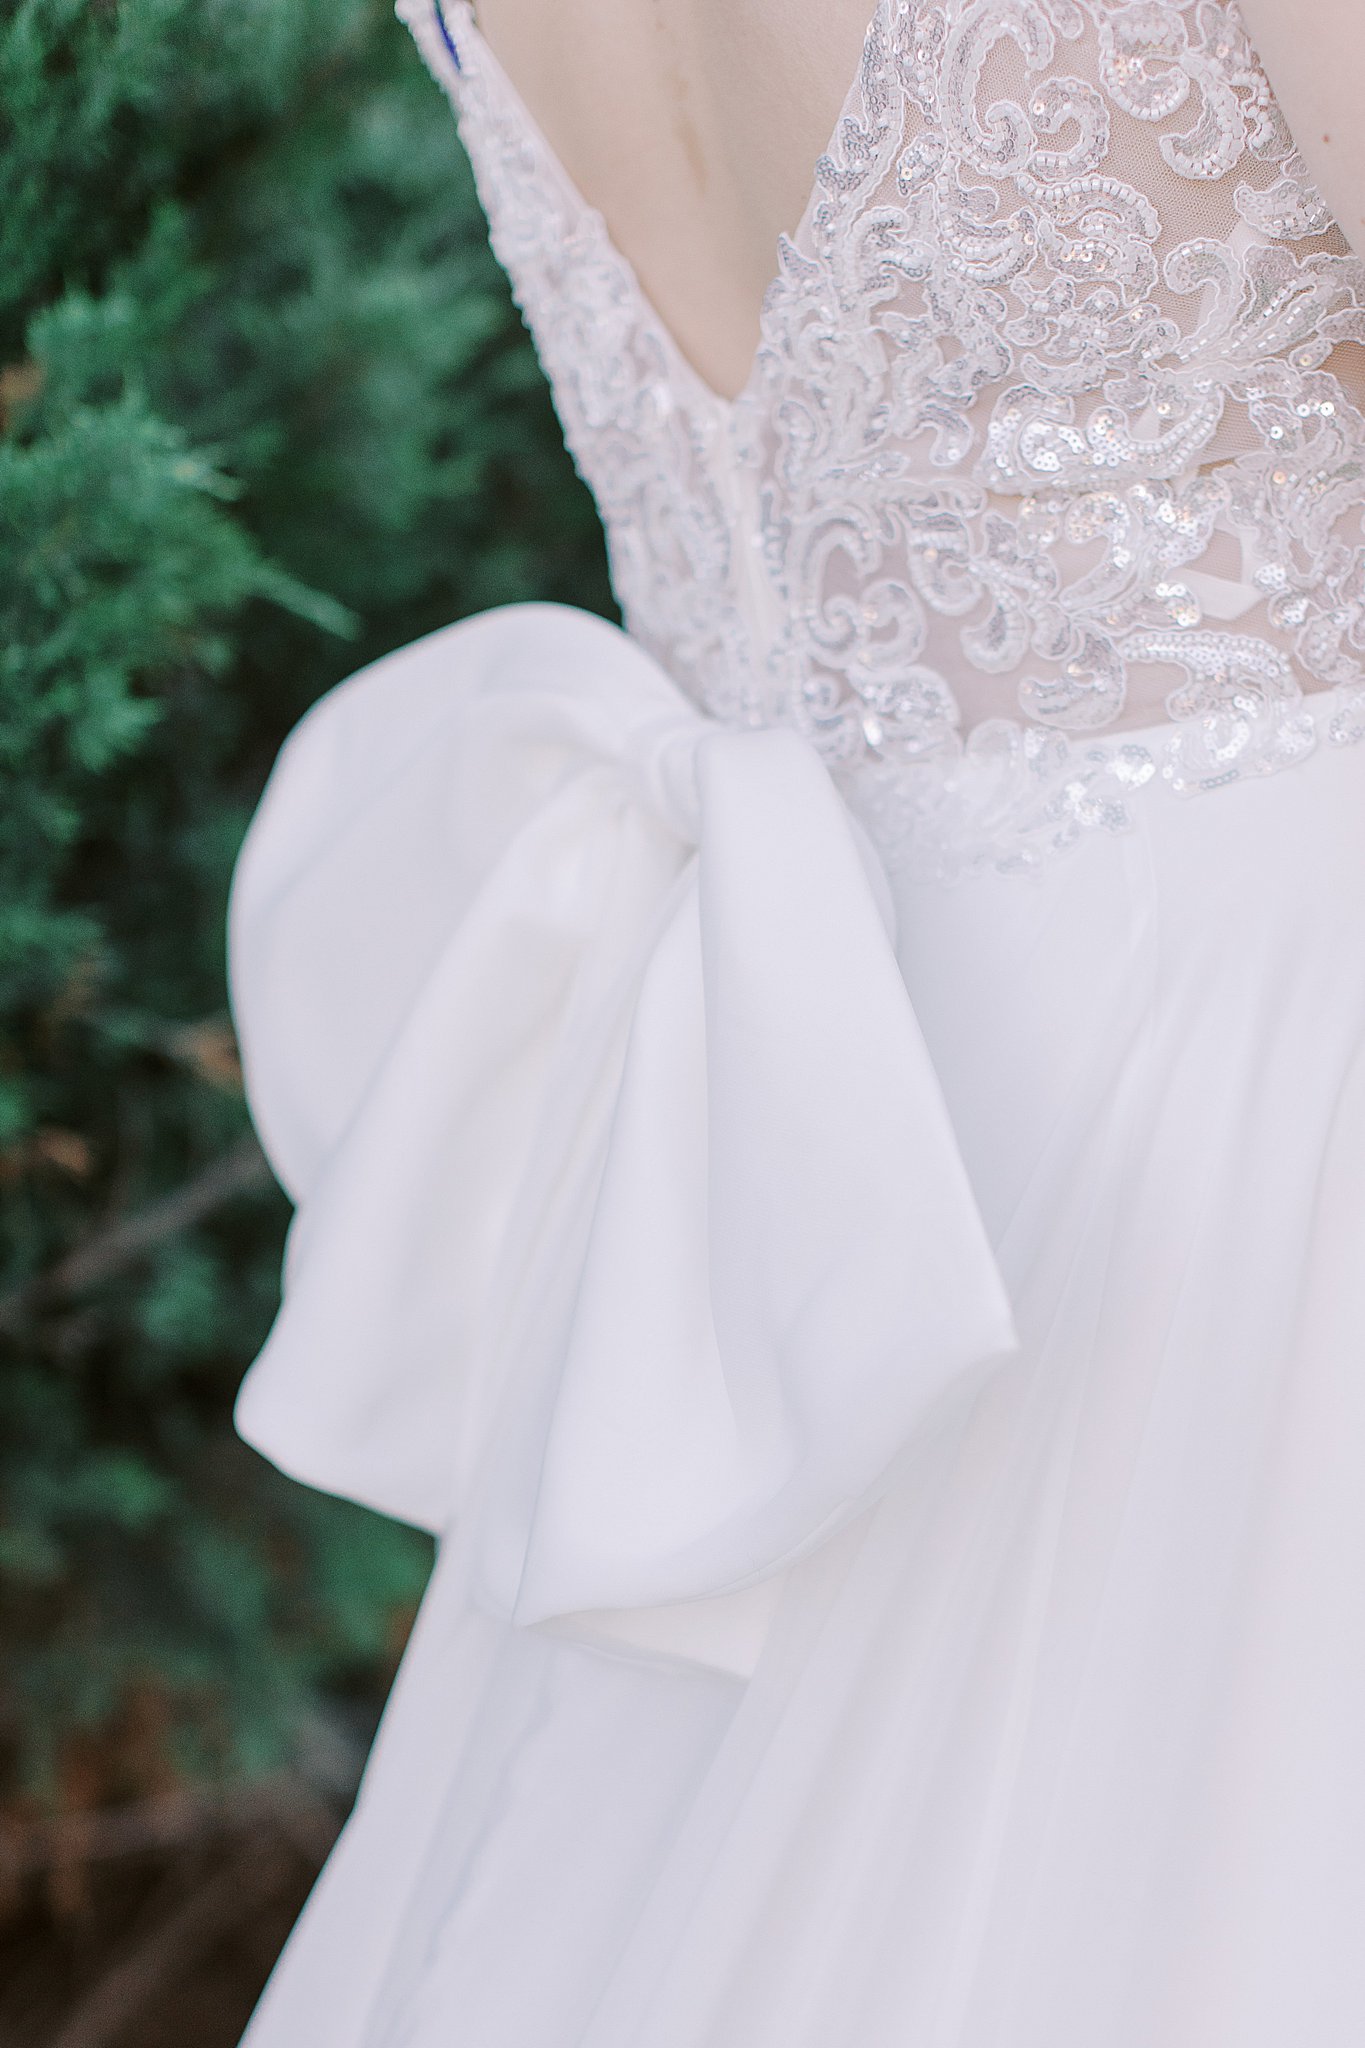 Bow Detail on Wedding Gown